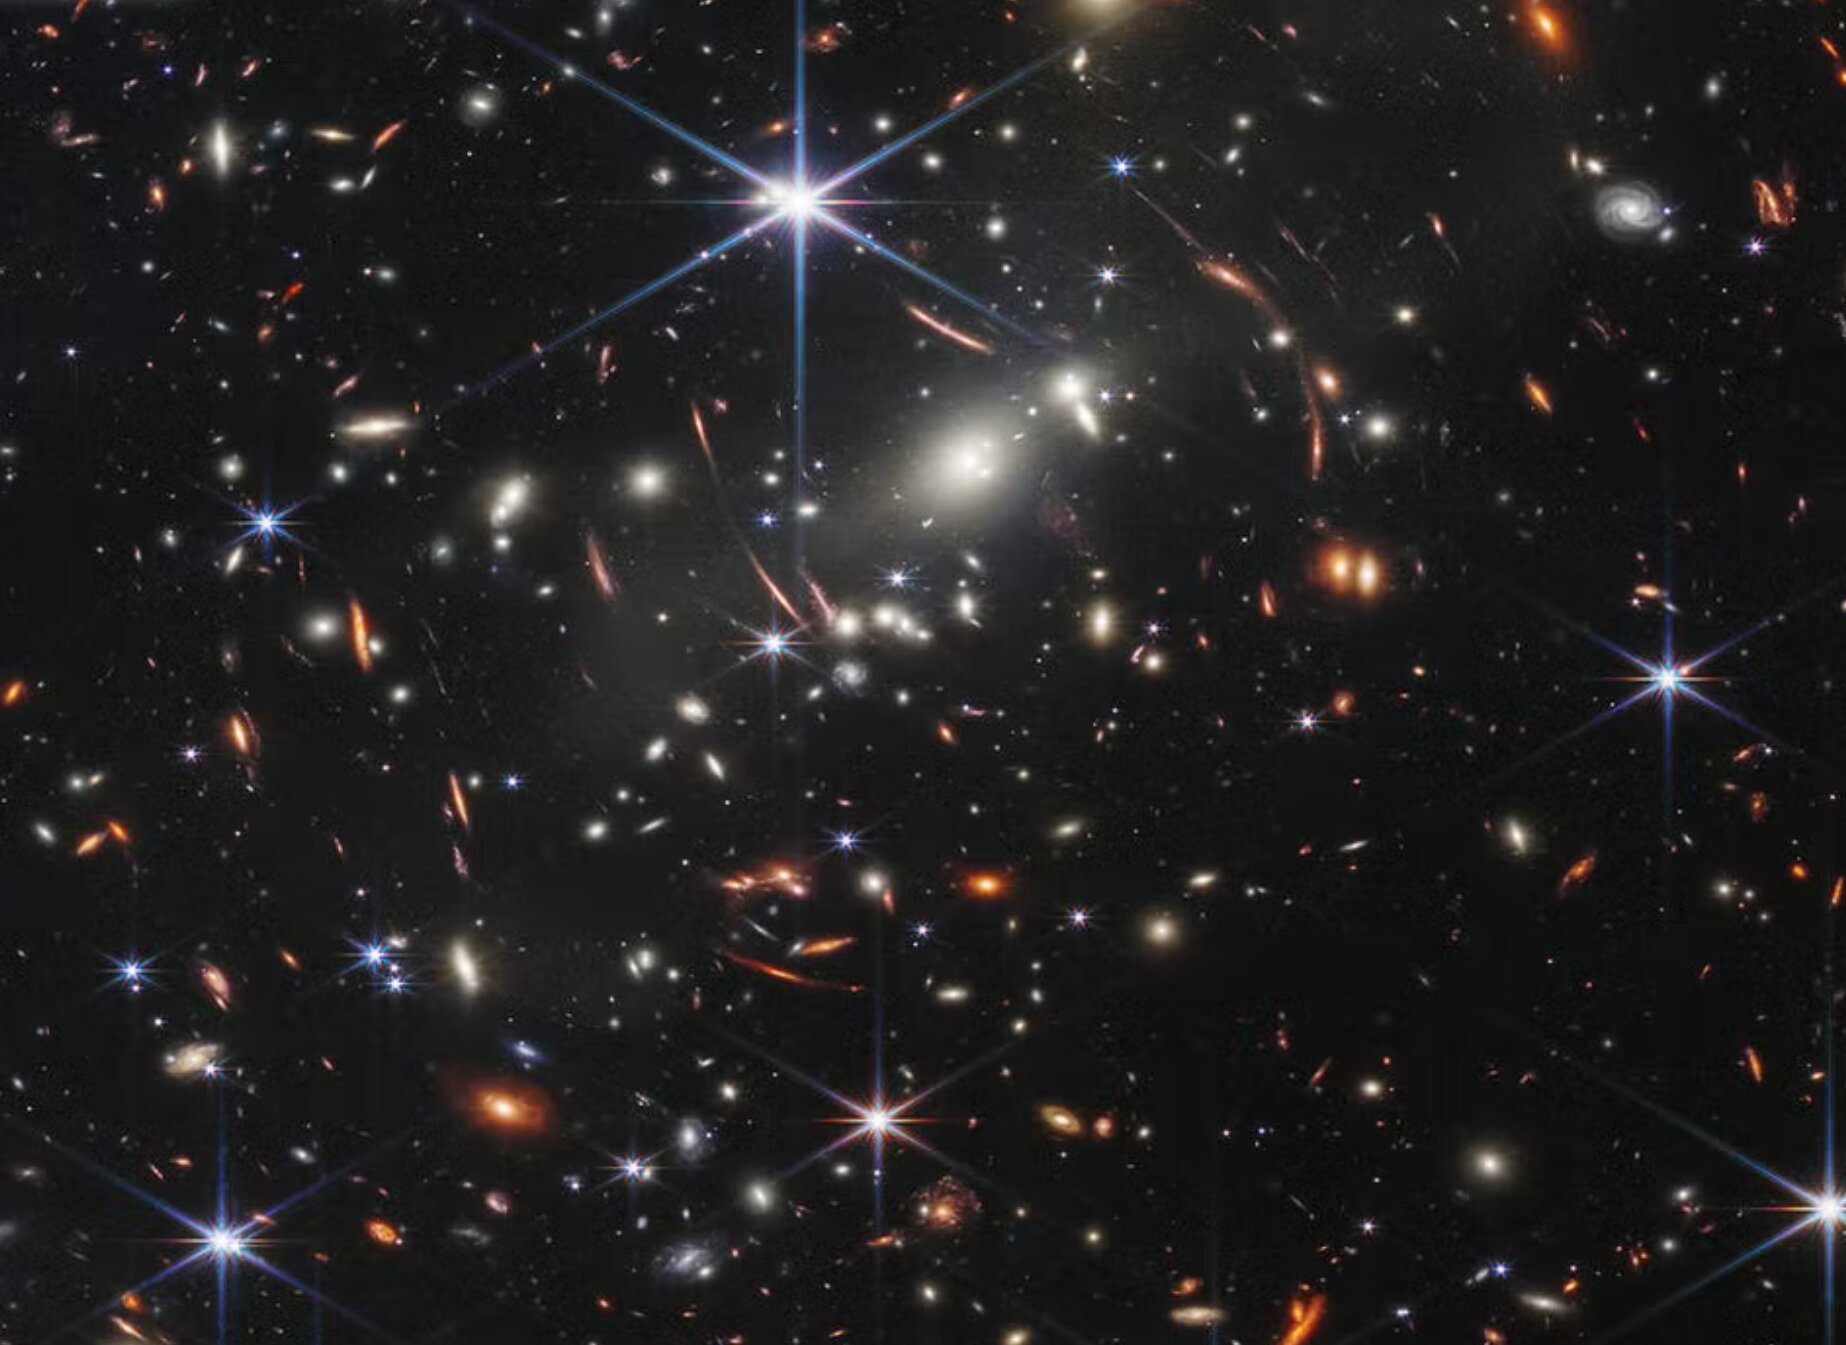 #First image from NASA’s James Webb Space Telescope reveals thousands of galaxies in stunning detail